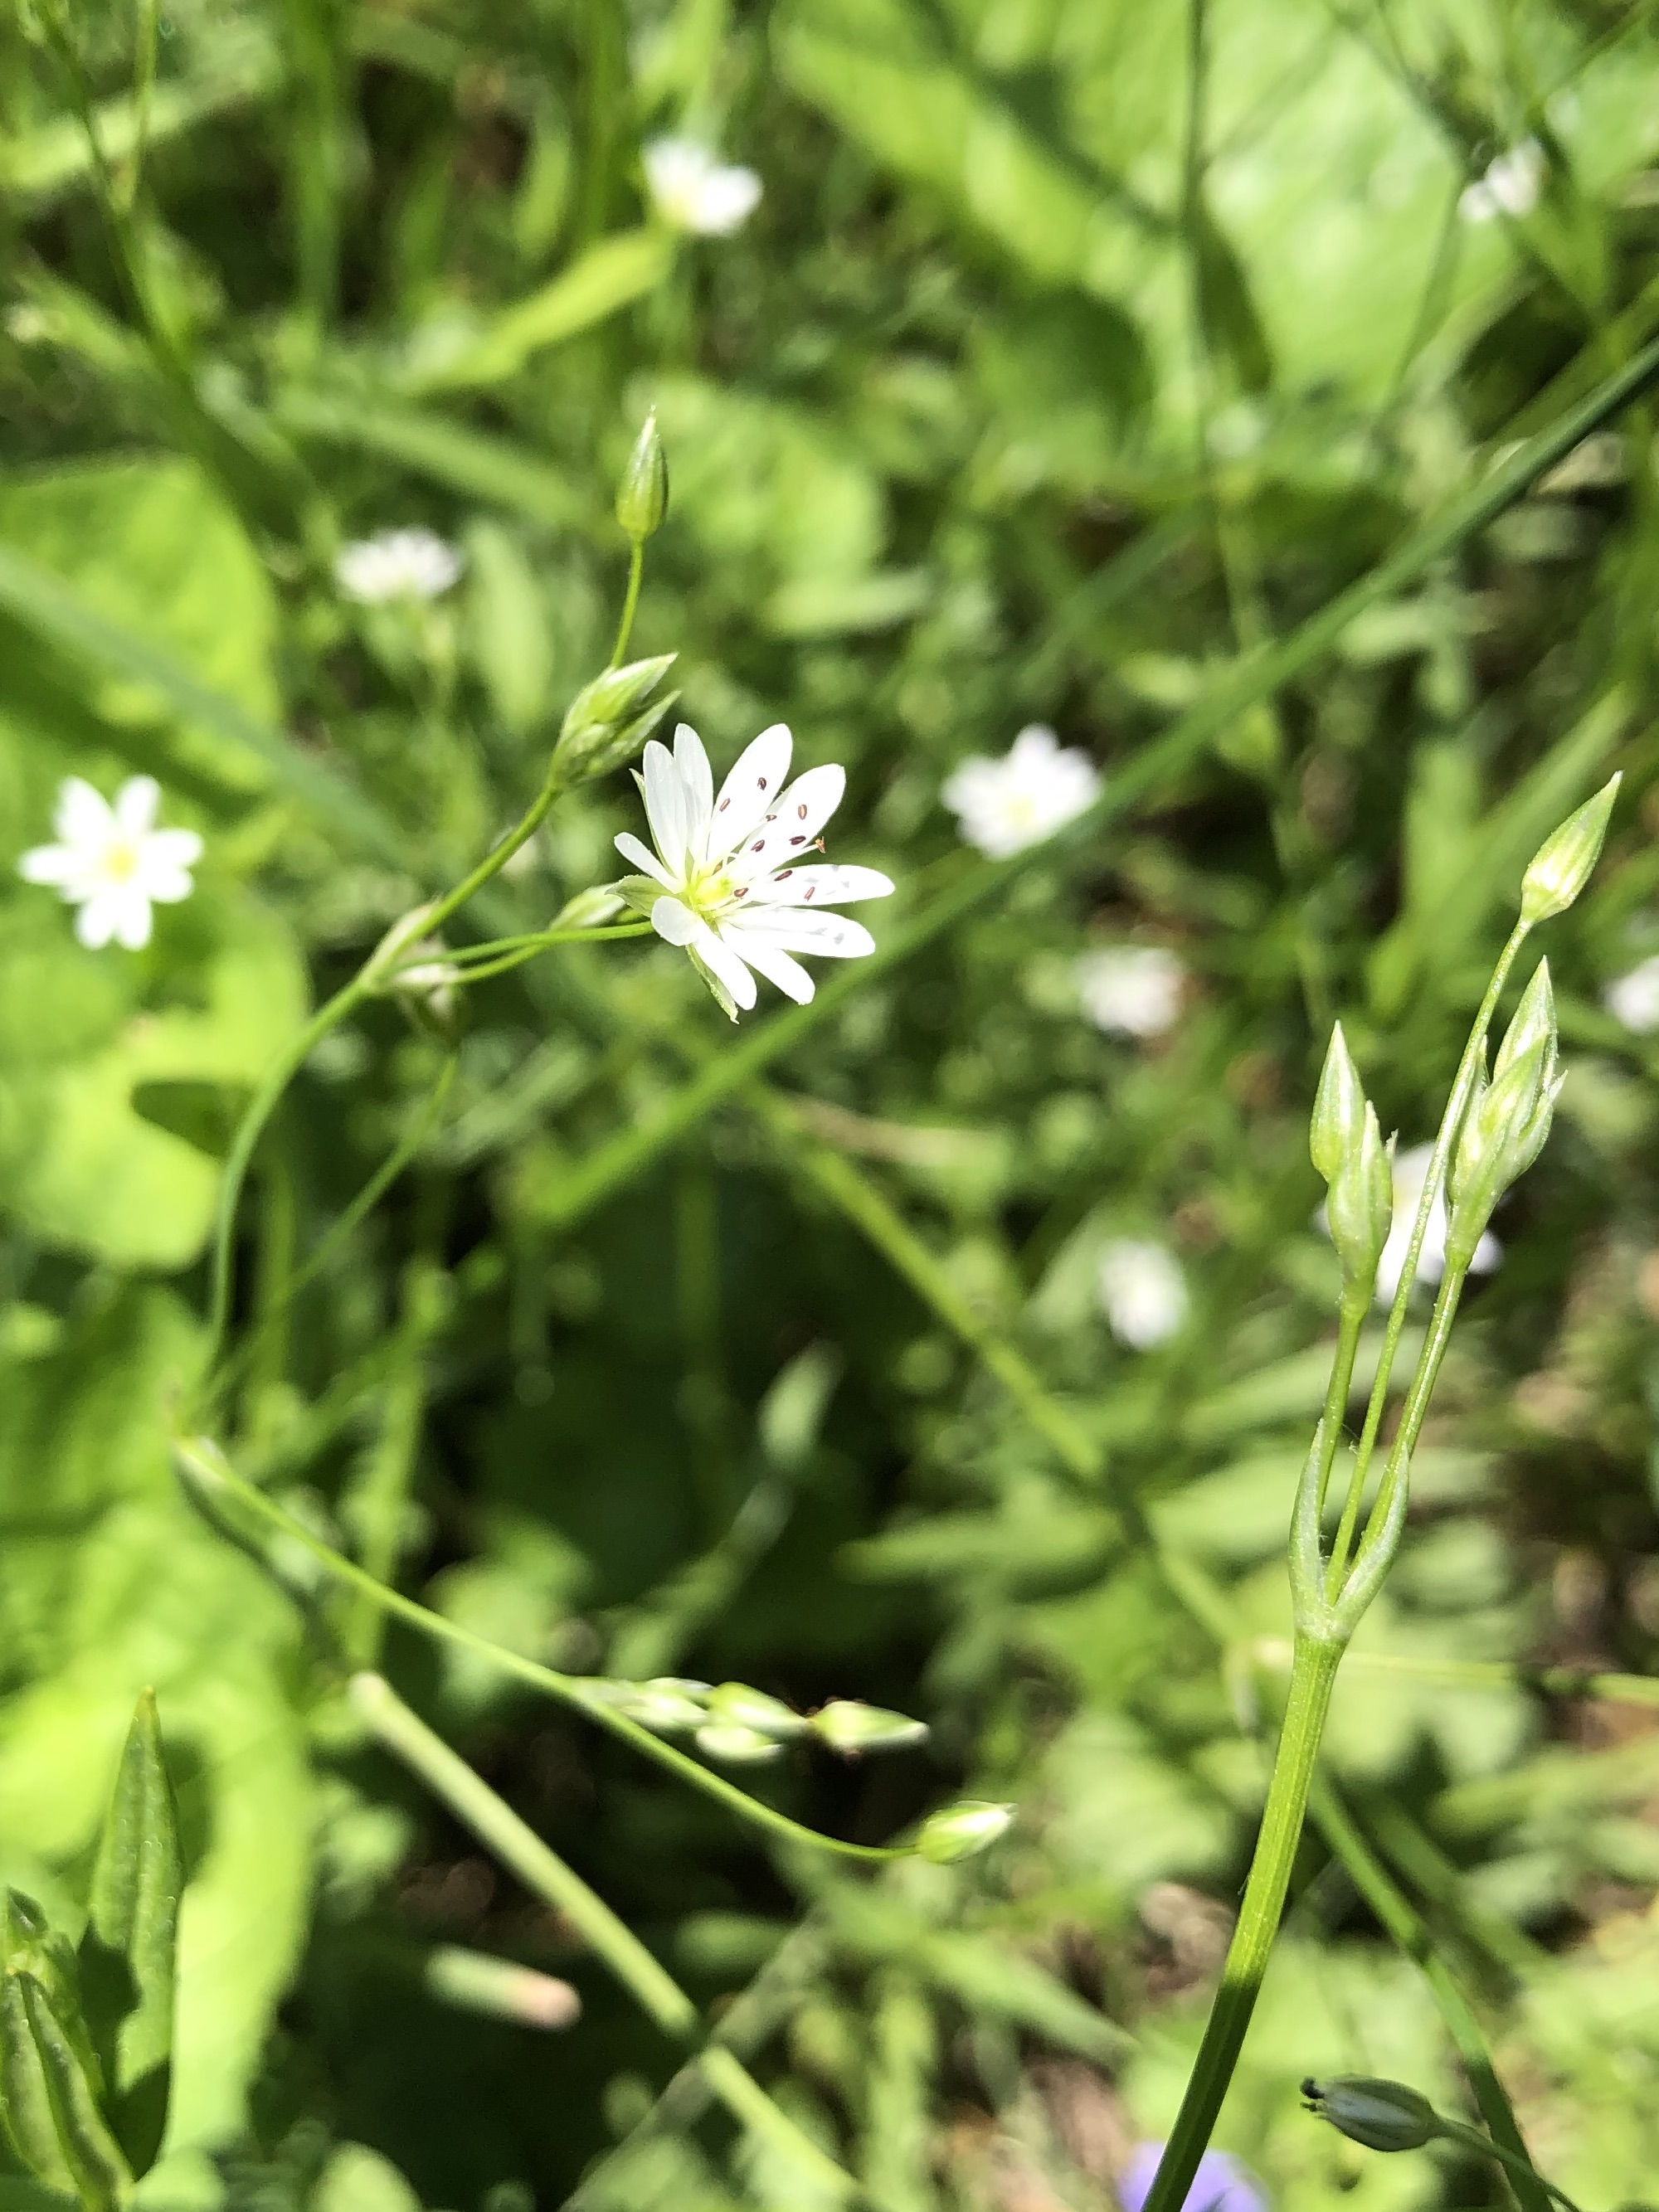 Common Stitchwort in a grassy clearing along the bike path between Odana Road and Midvale Boulevard in Madison, Wisconsin on June 2, 2022.